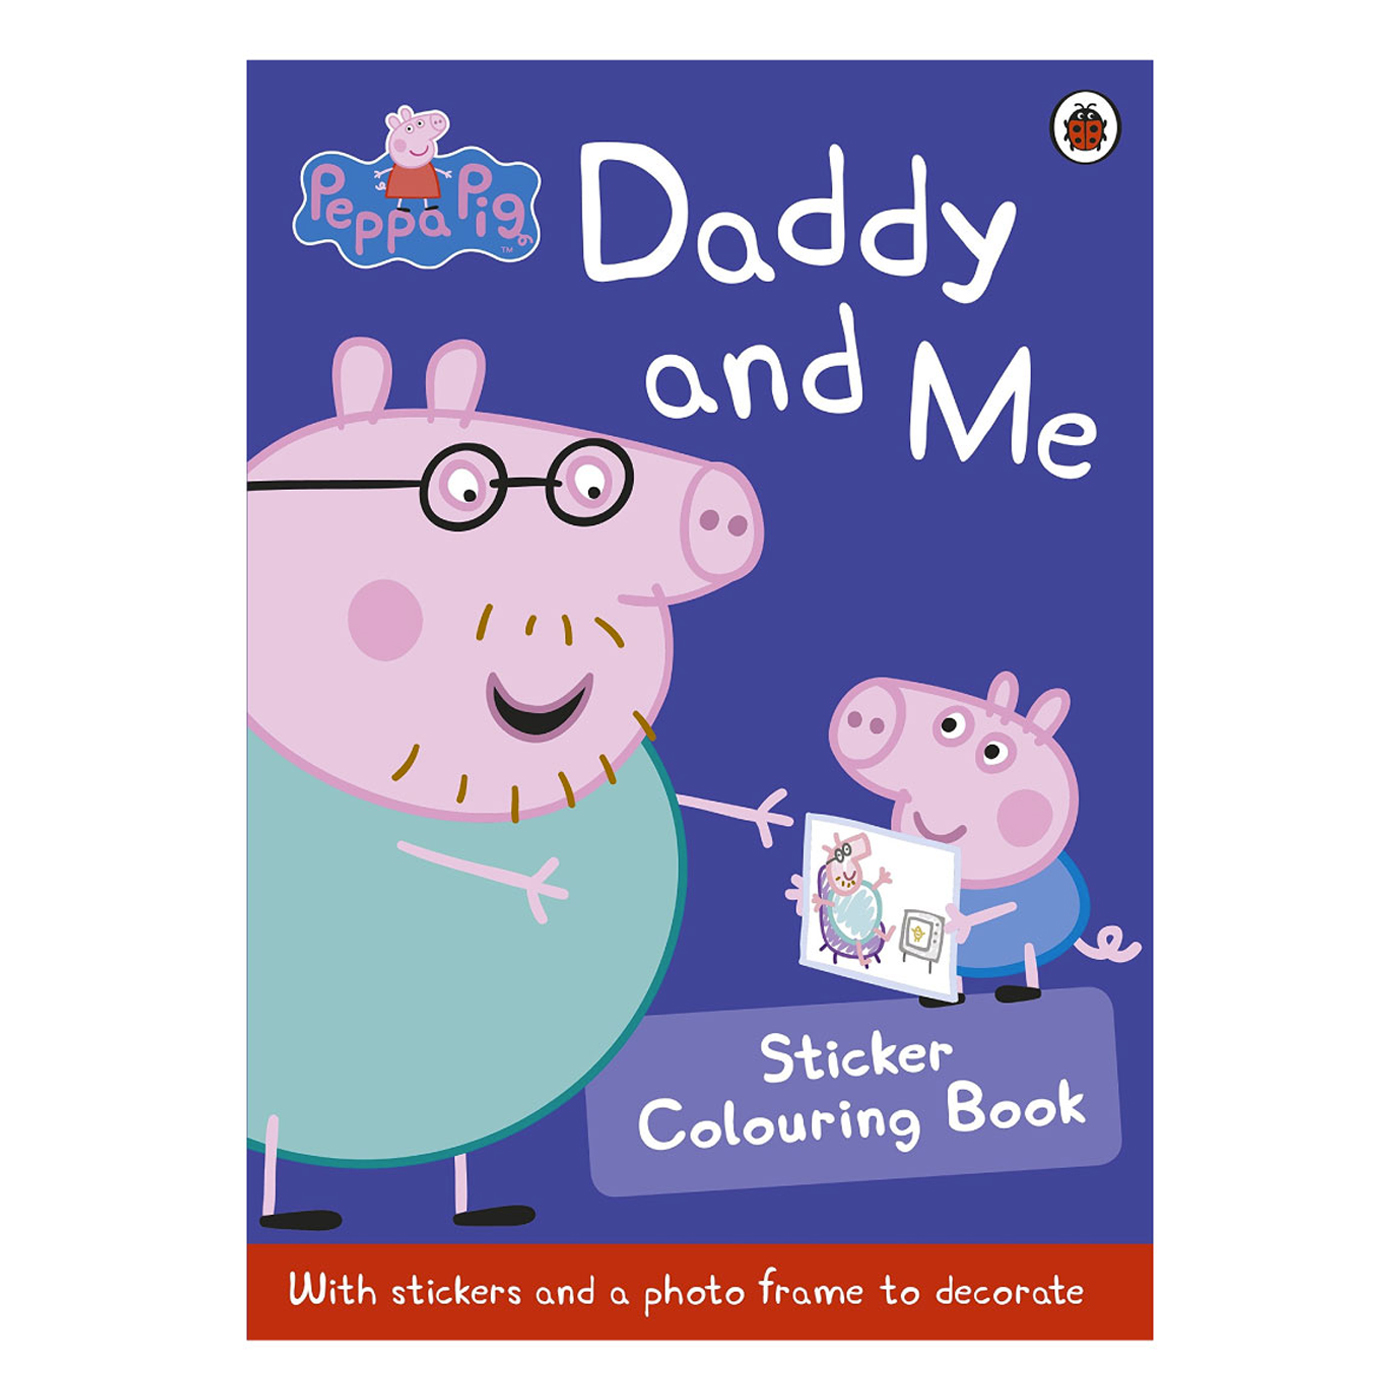 LADYBIRD Peppa Pig: Daddy And Me Sticker Colouring Book